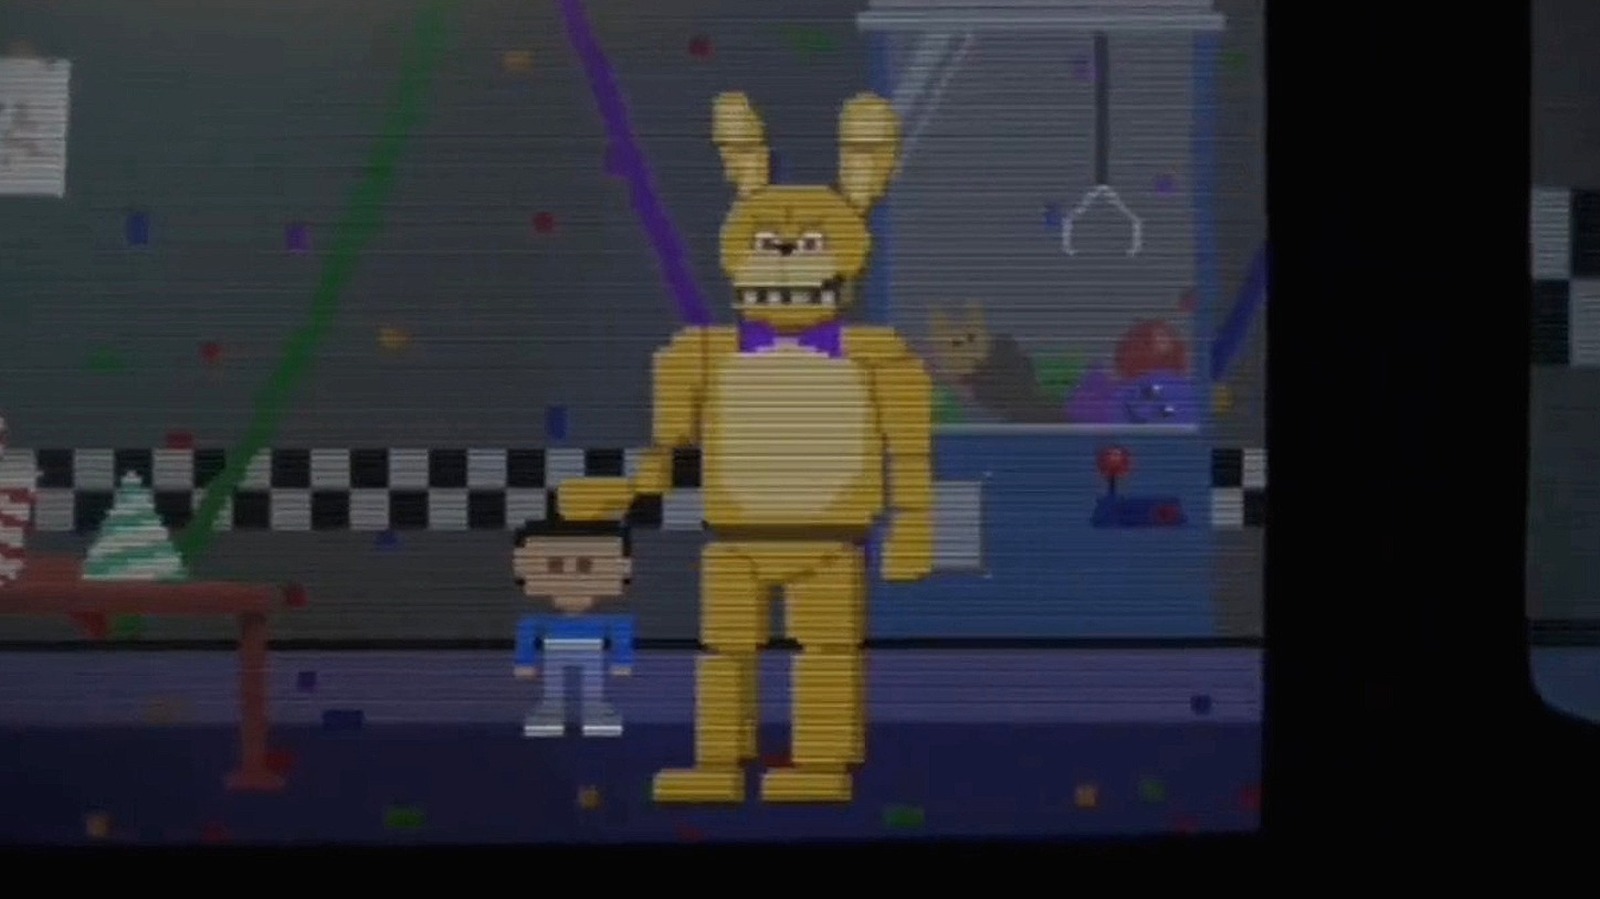 Five Nights at Freddy's has a hidden message in its credits that